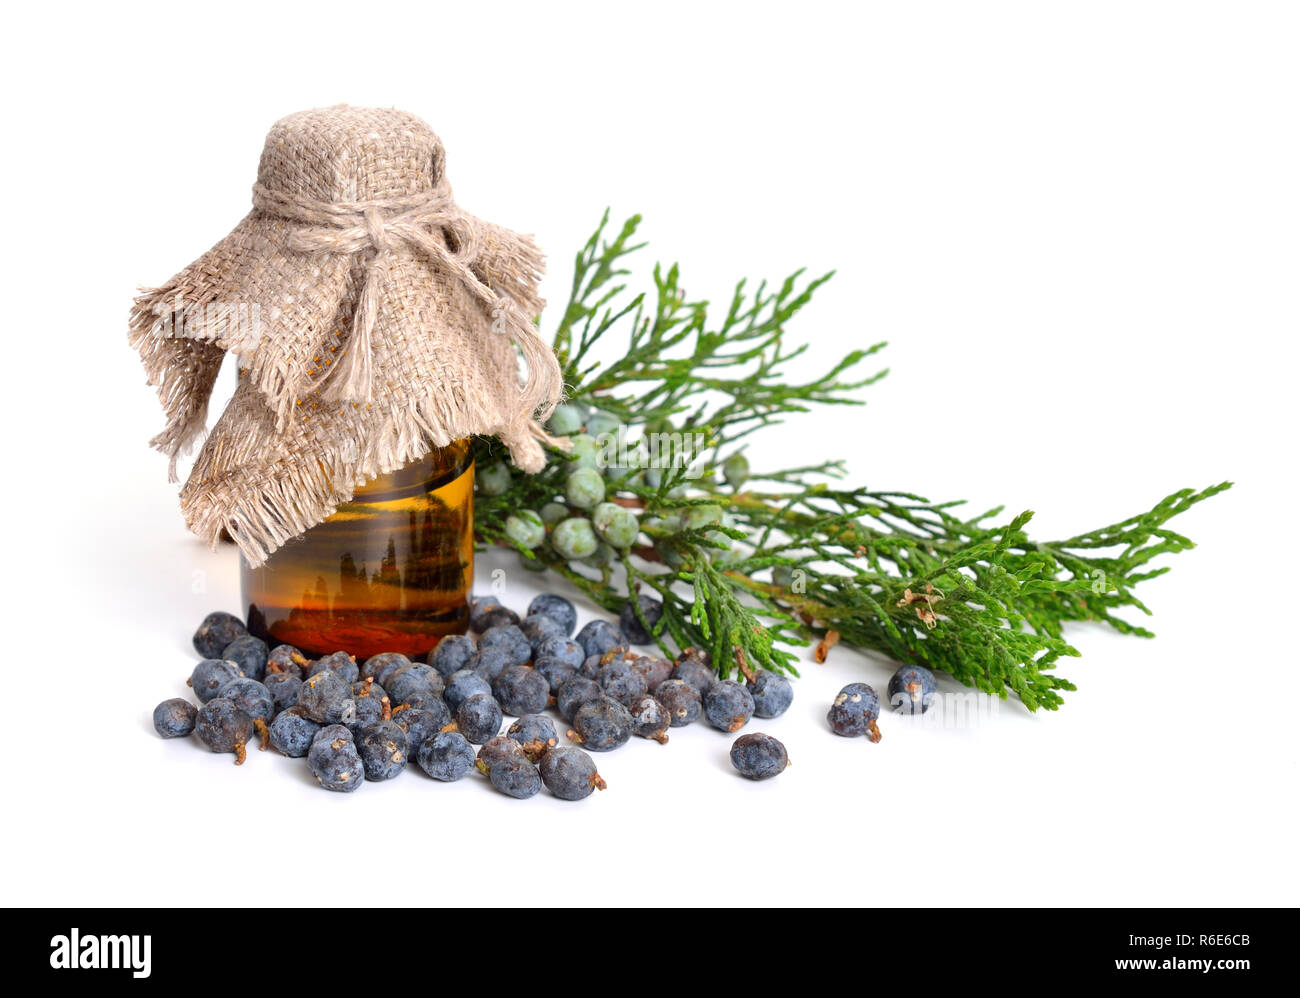 Juniperus sabina with green and ripe Cones (berries). Essential oil in the pharmaceutical bottle. Isolated on white. Stock Photo